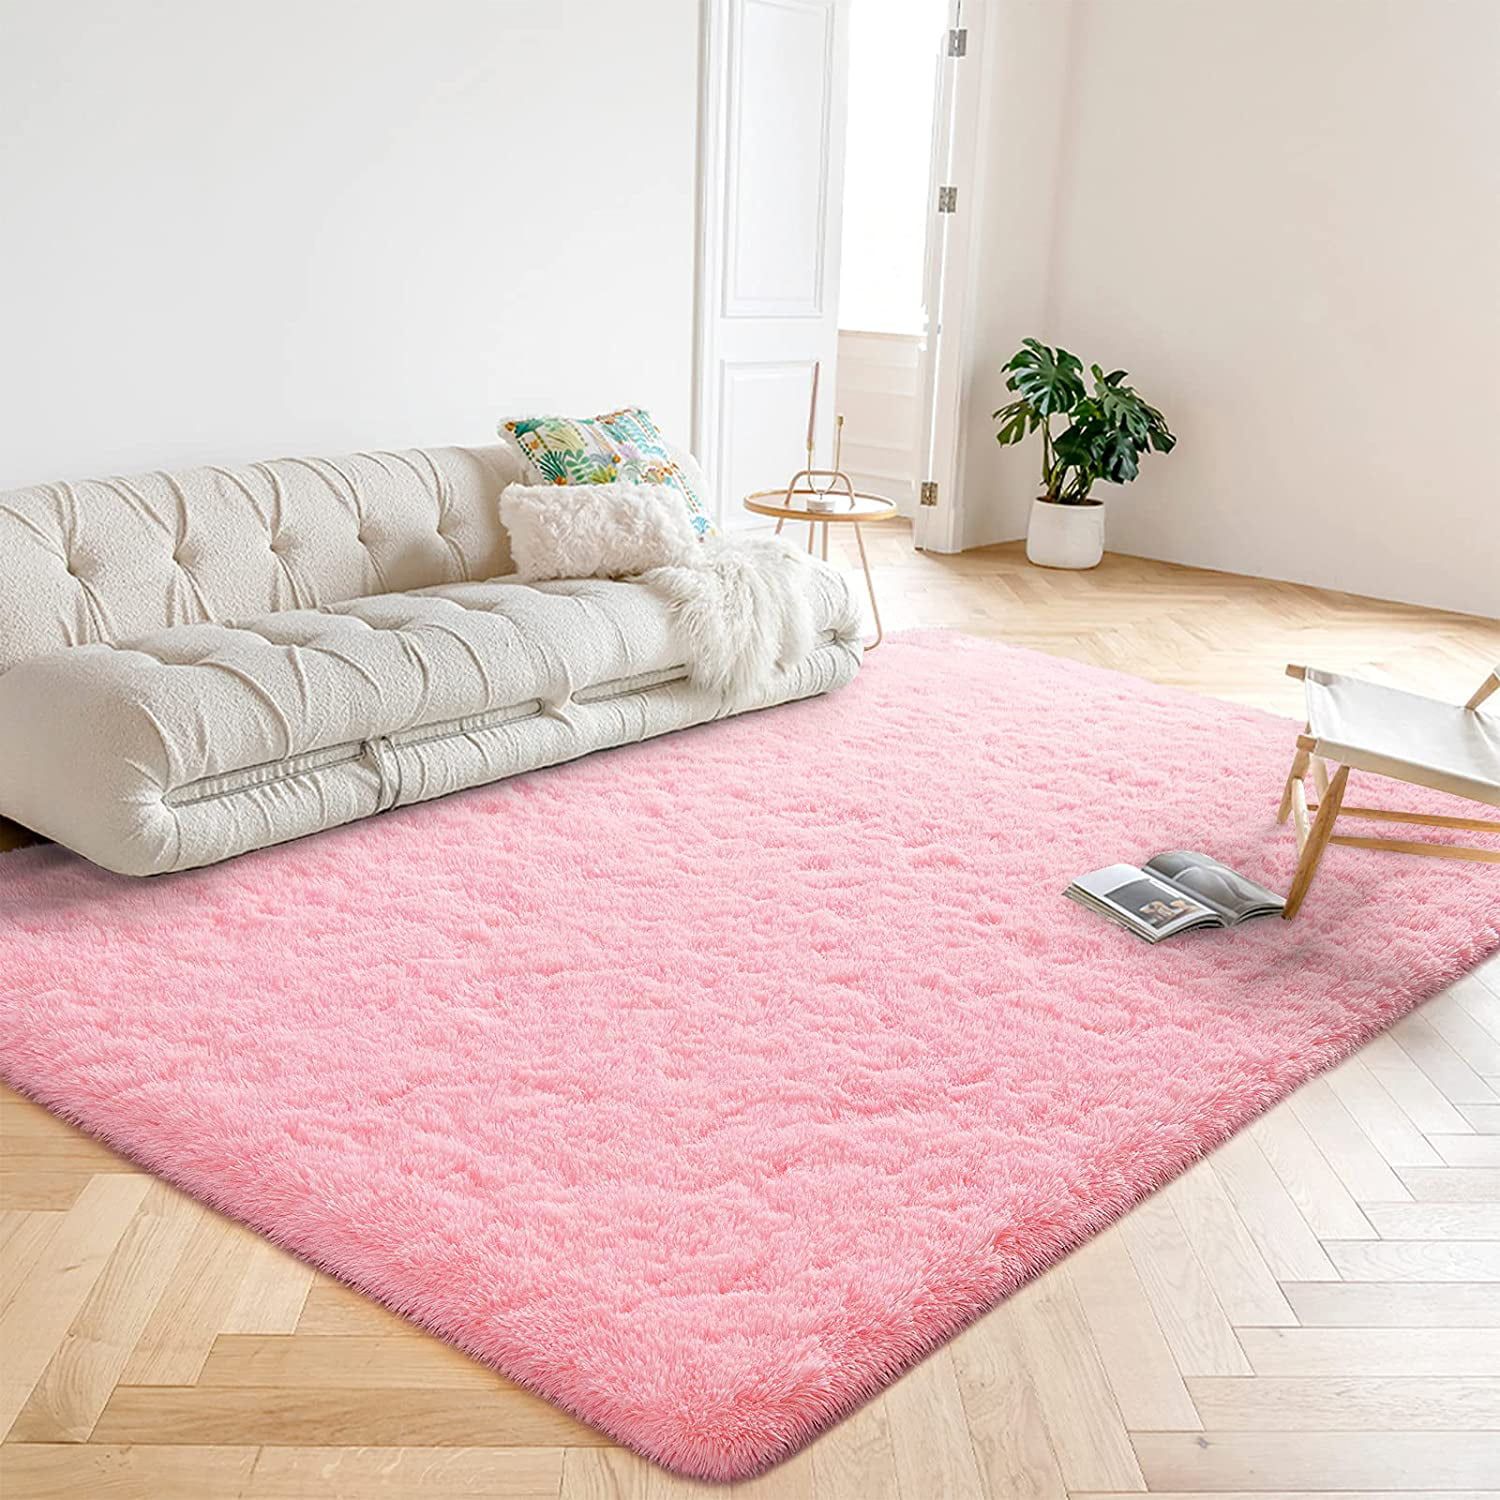 Lochas Luxury Fluffy Rugs Ultra Soft Shag Rug For Bedroom Living Room Kids  Room, Children,6'X9',Pink – Walmart Within Pink Soft Touch Shag Rugs (View 4 of 15)